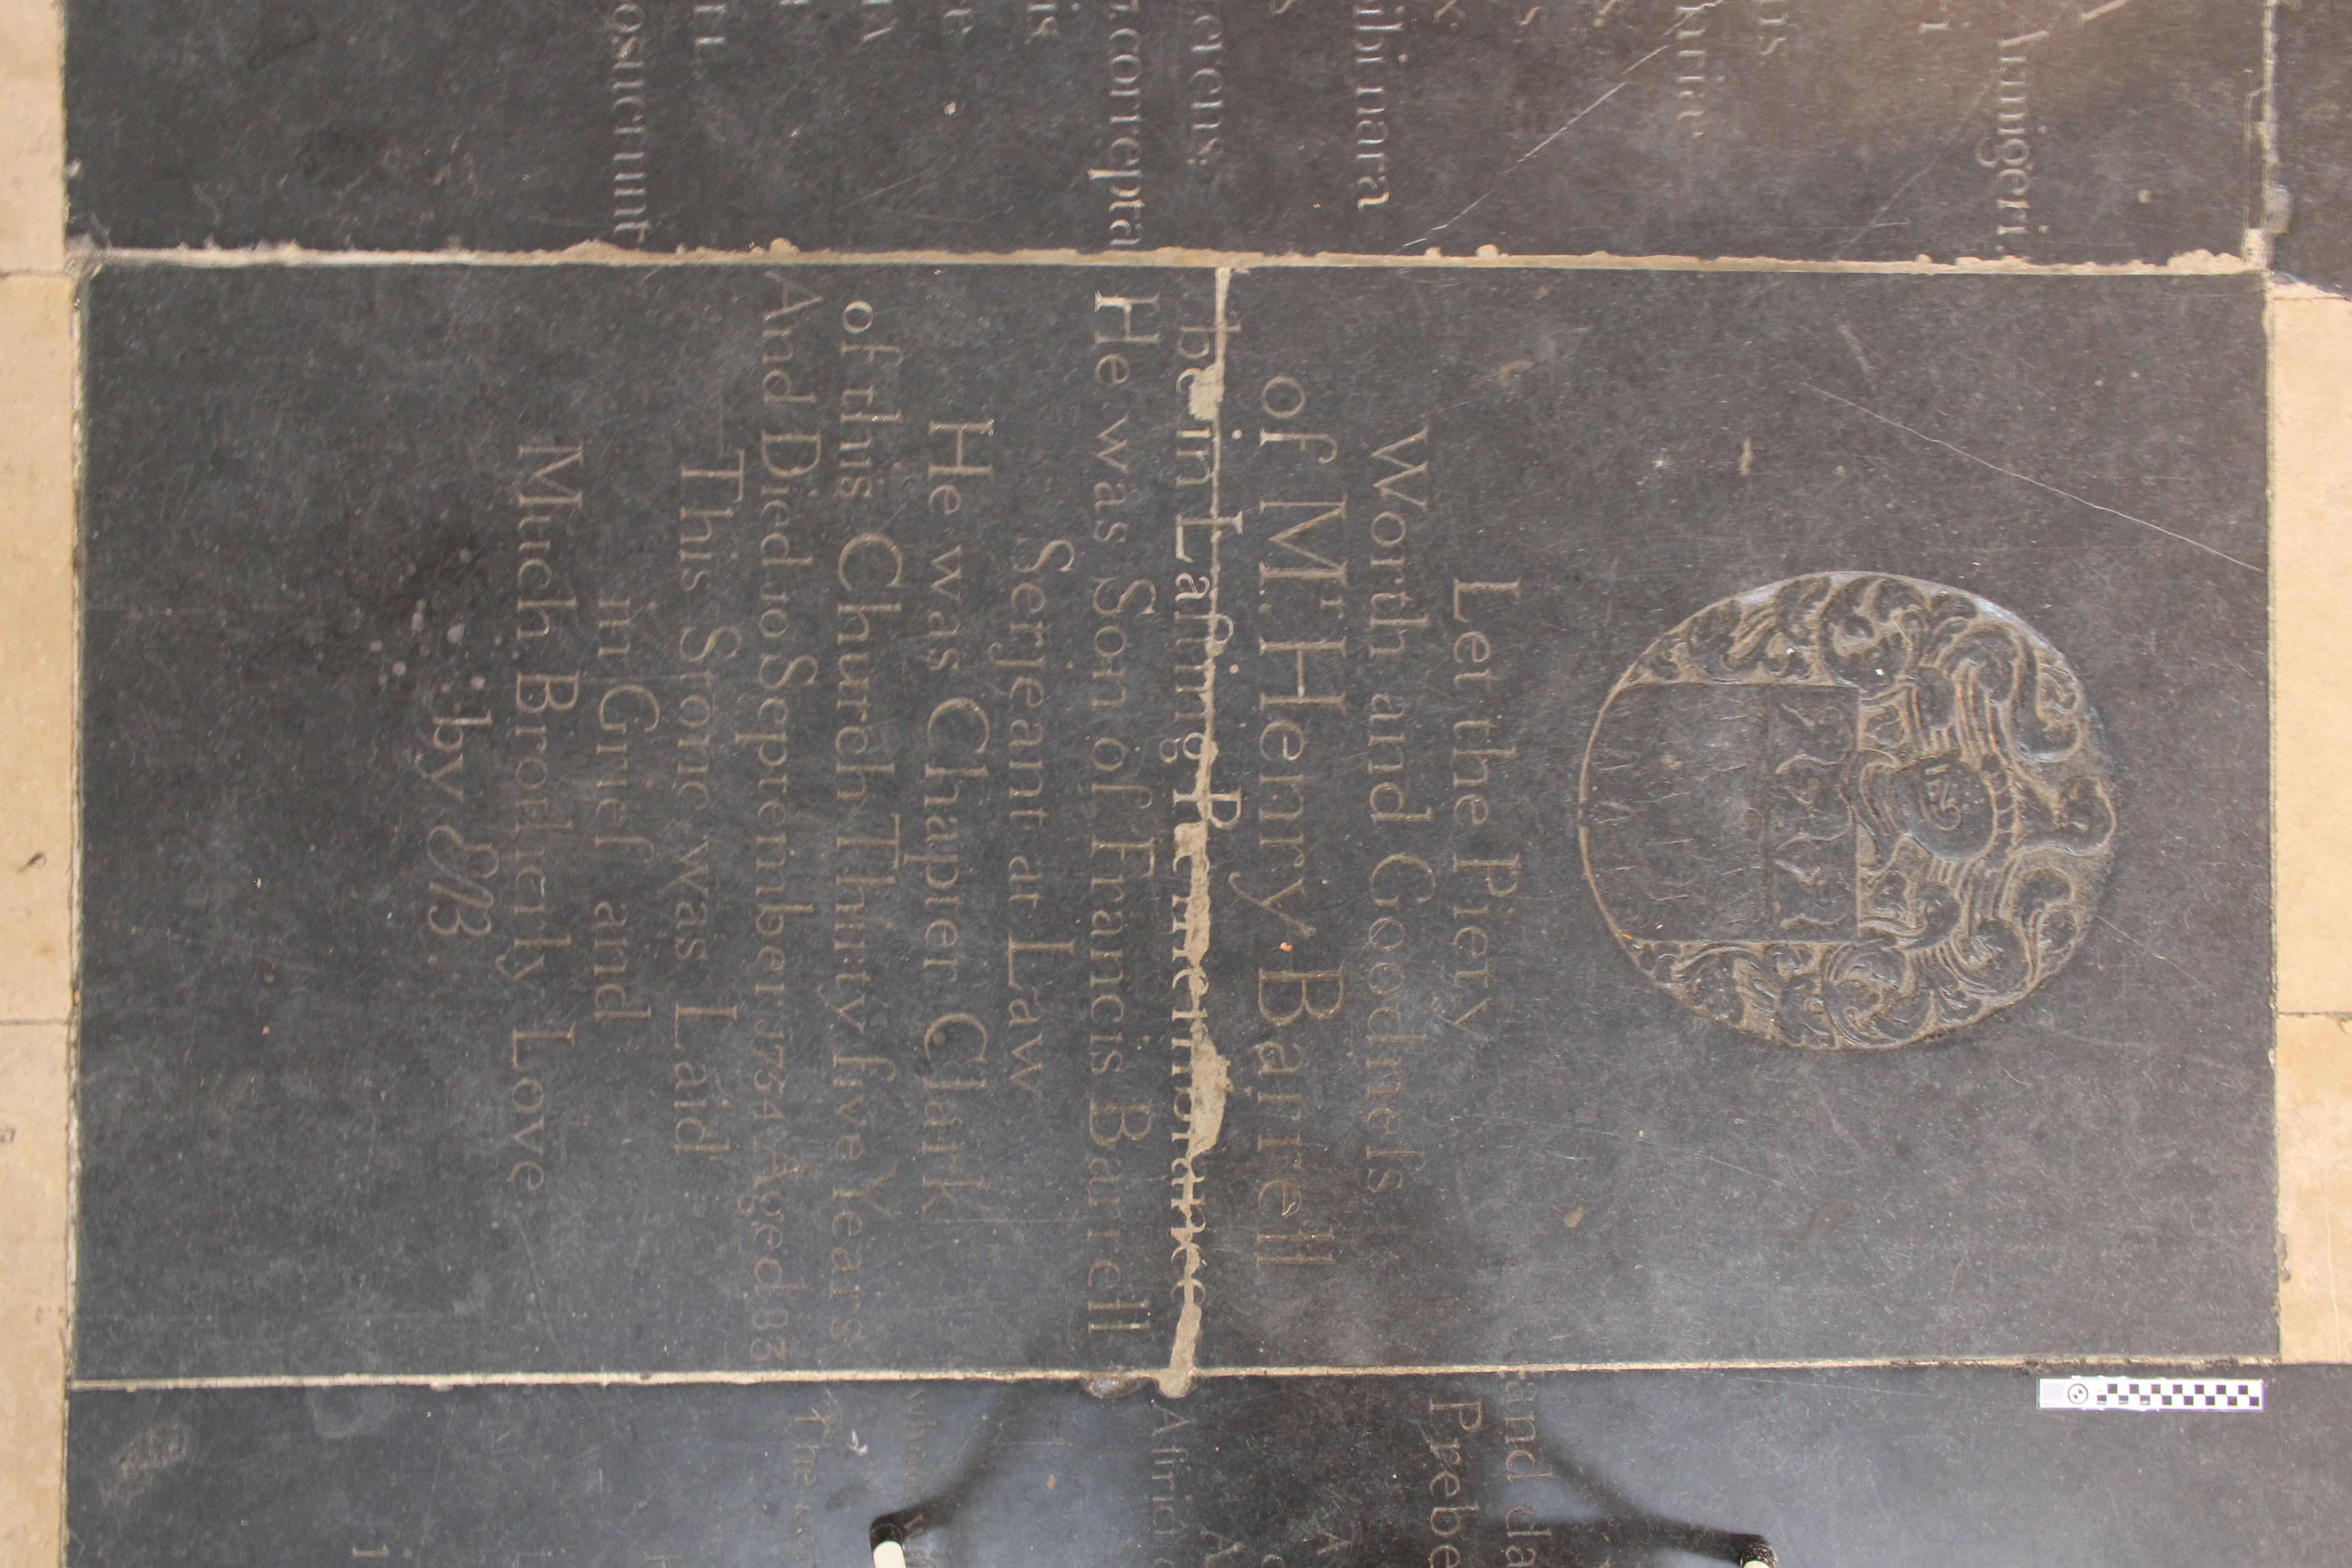 Photograph of the ledger stone dedicated to Henry Barrell in the center nave aisle.